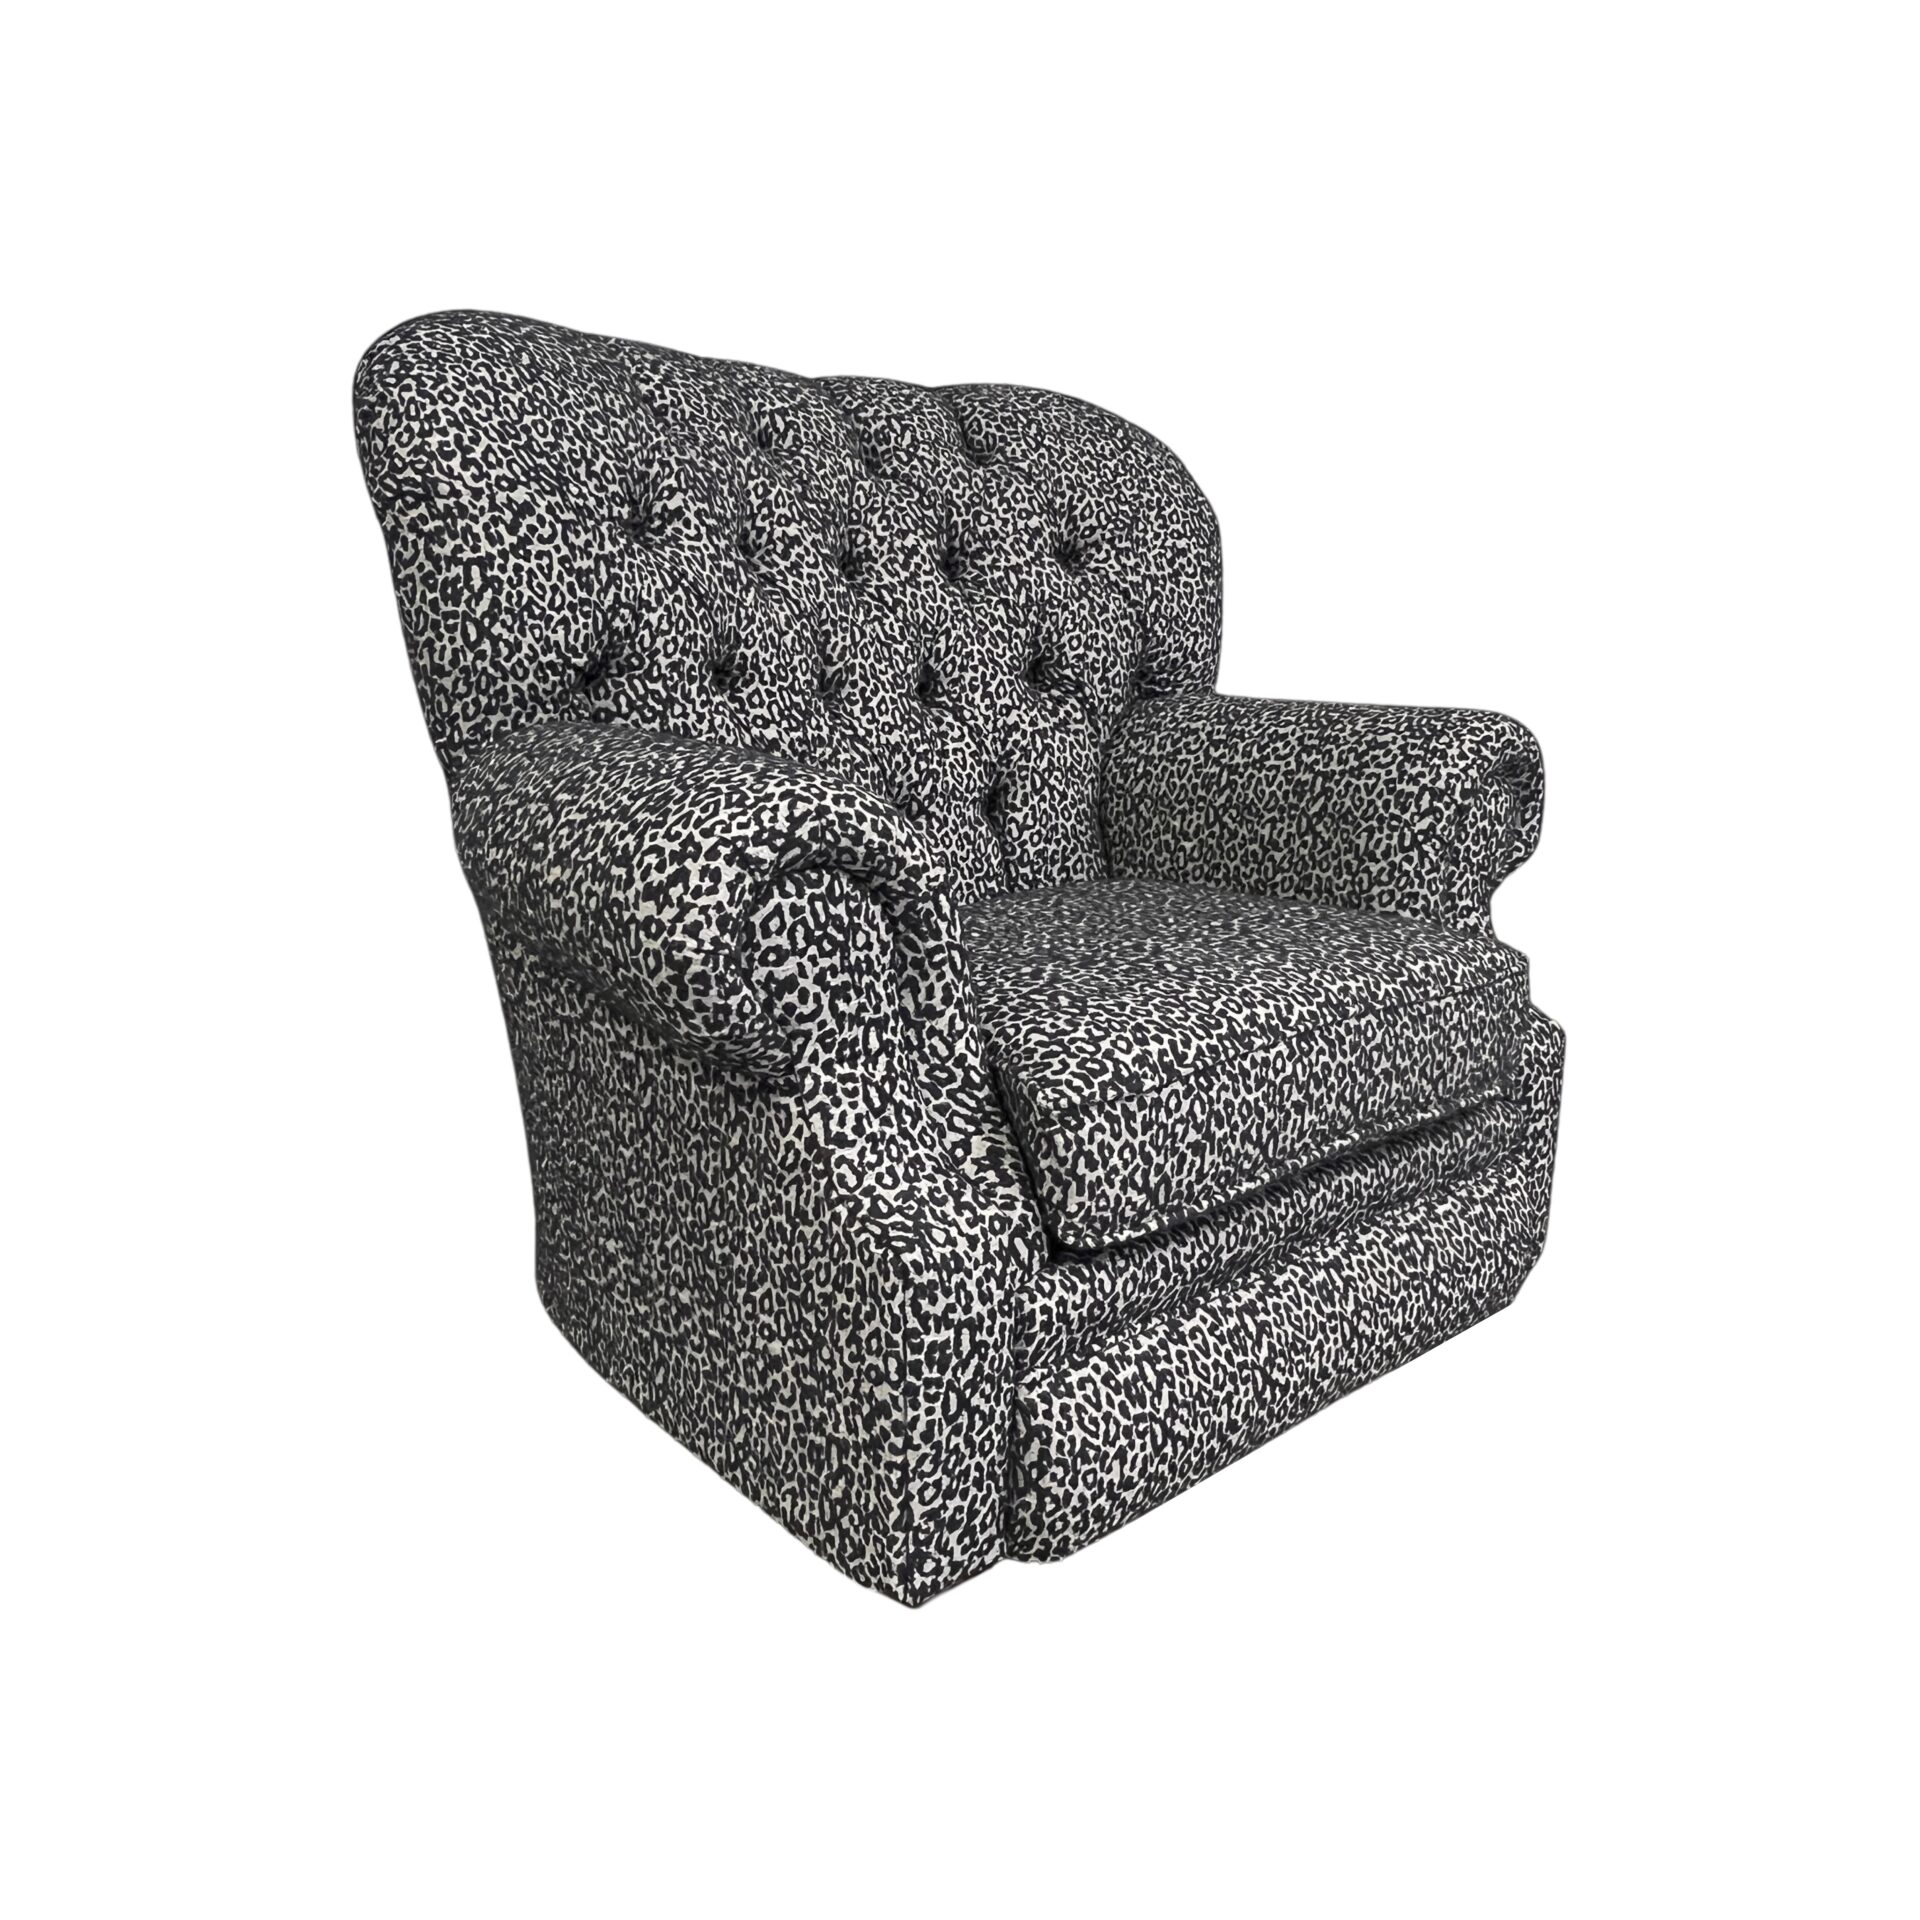 CARLY-upholstered-chair-luxury-furniture-blend-home-furnishings